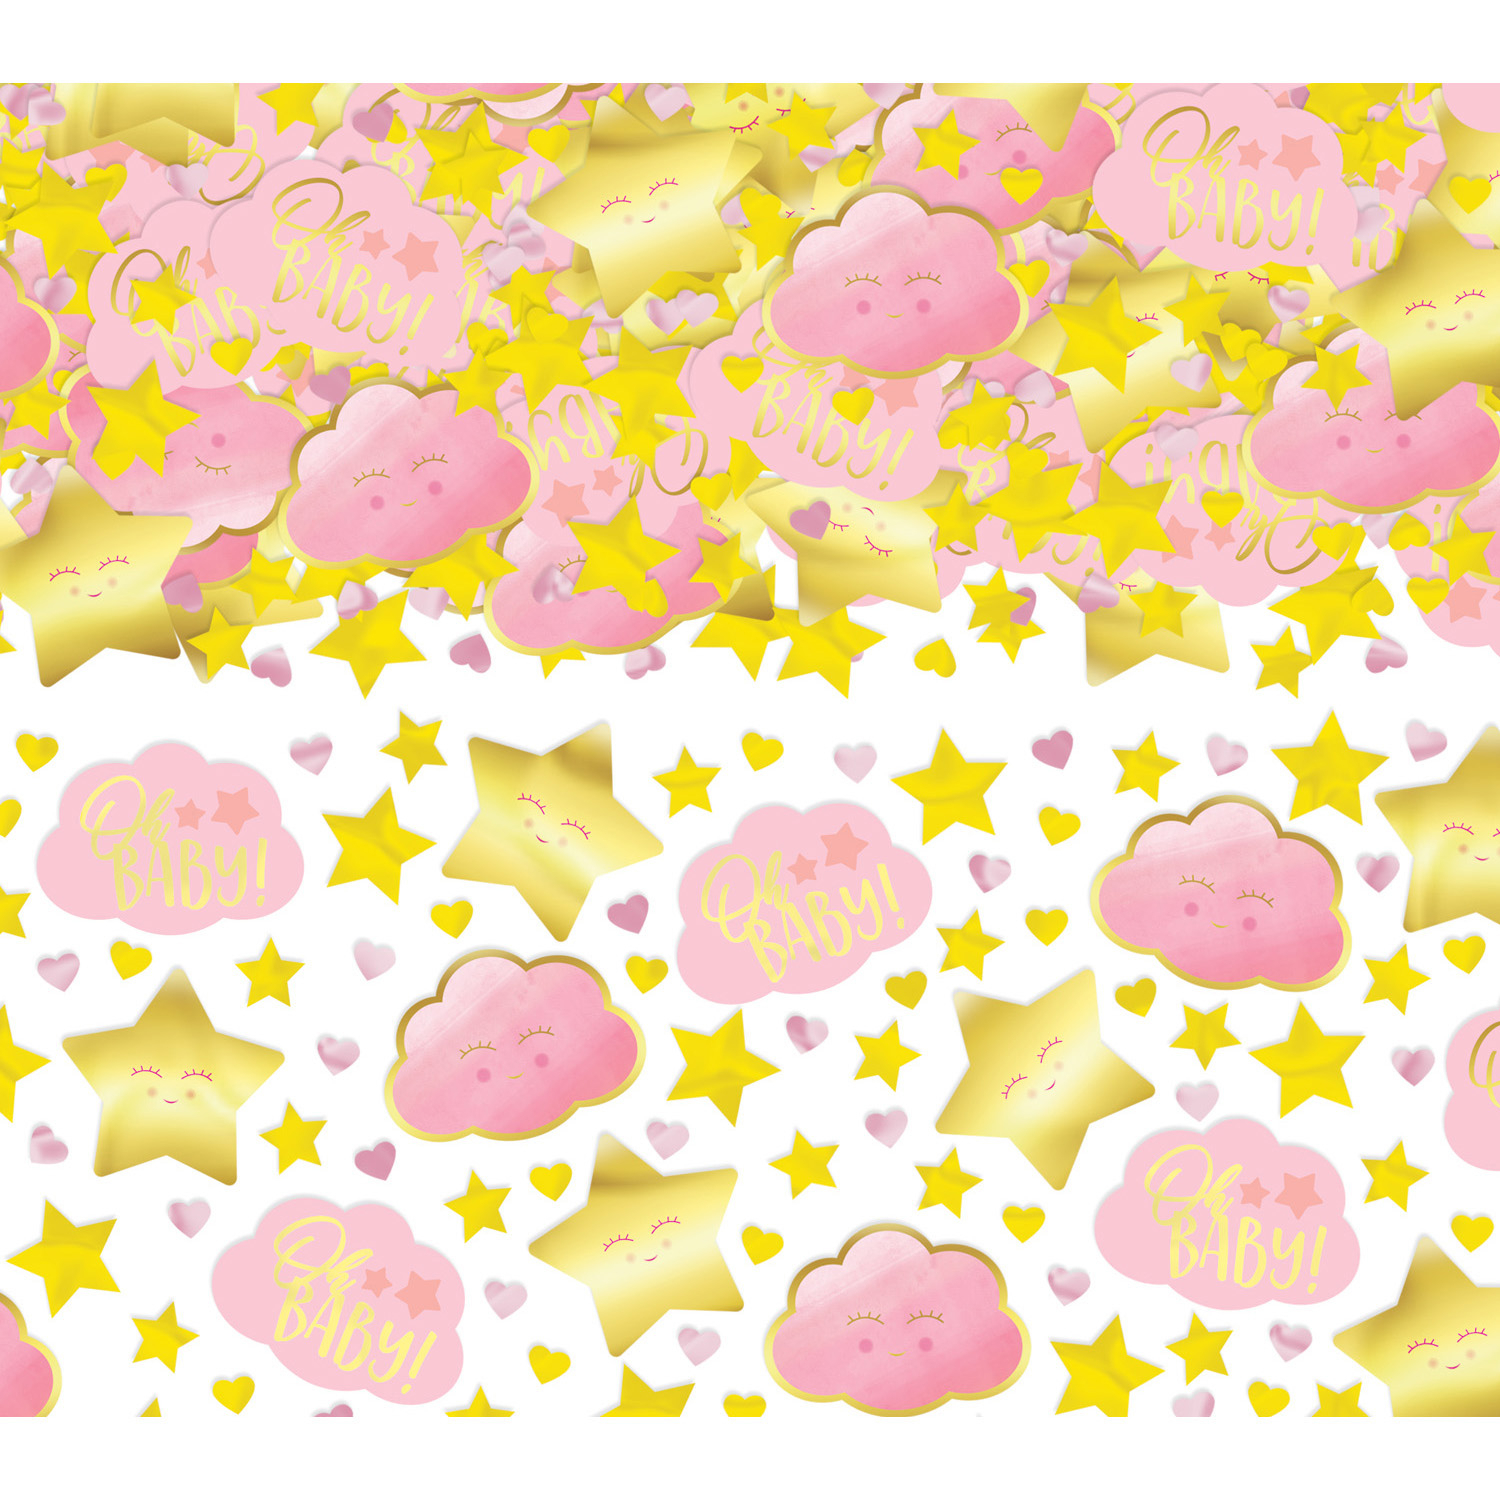 Sweets - Oh baby! pink, gold